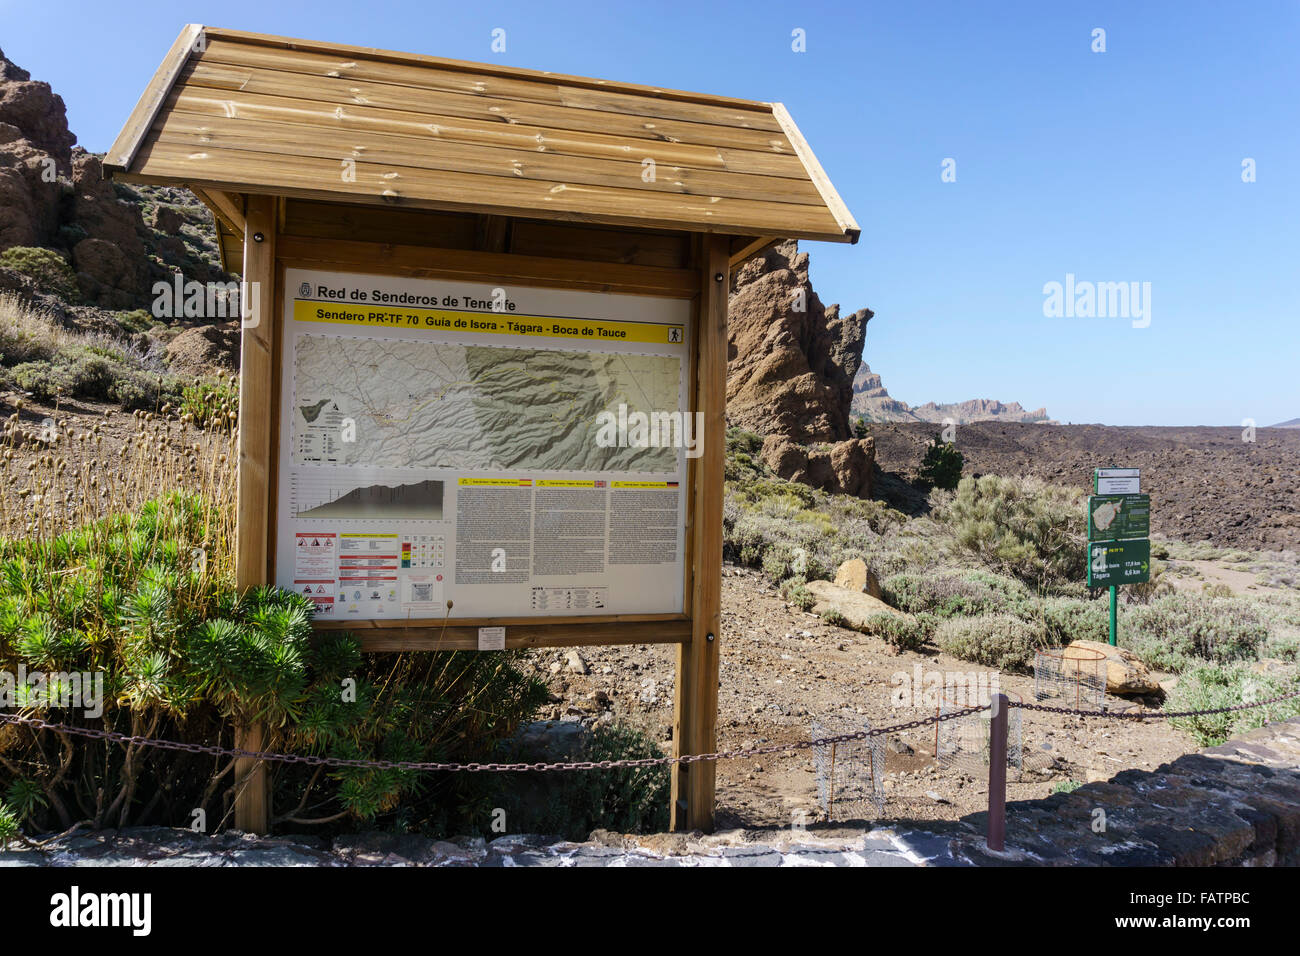 Tenerife, Canary Islands - Mount Teide national park. At Juan Evora visitor centre. Interpretation sign and walking route guide. Stock Photo